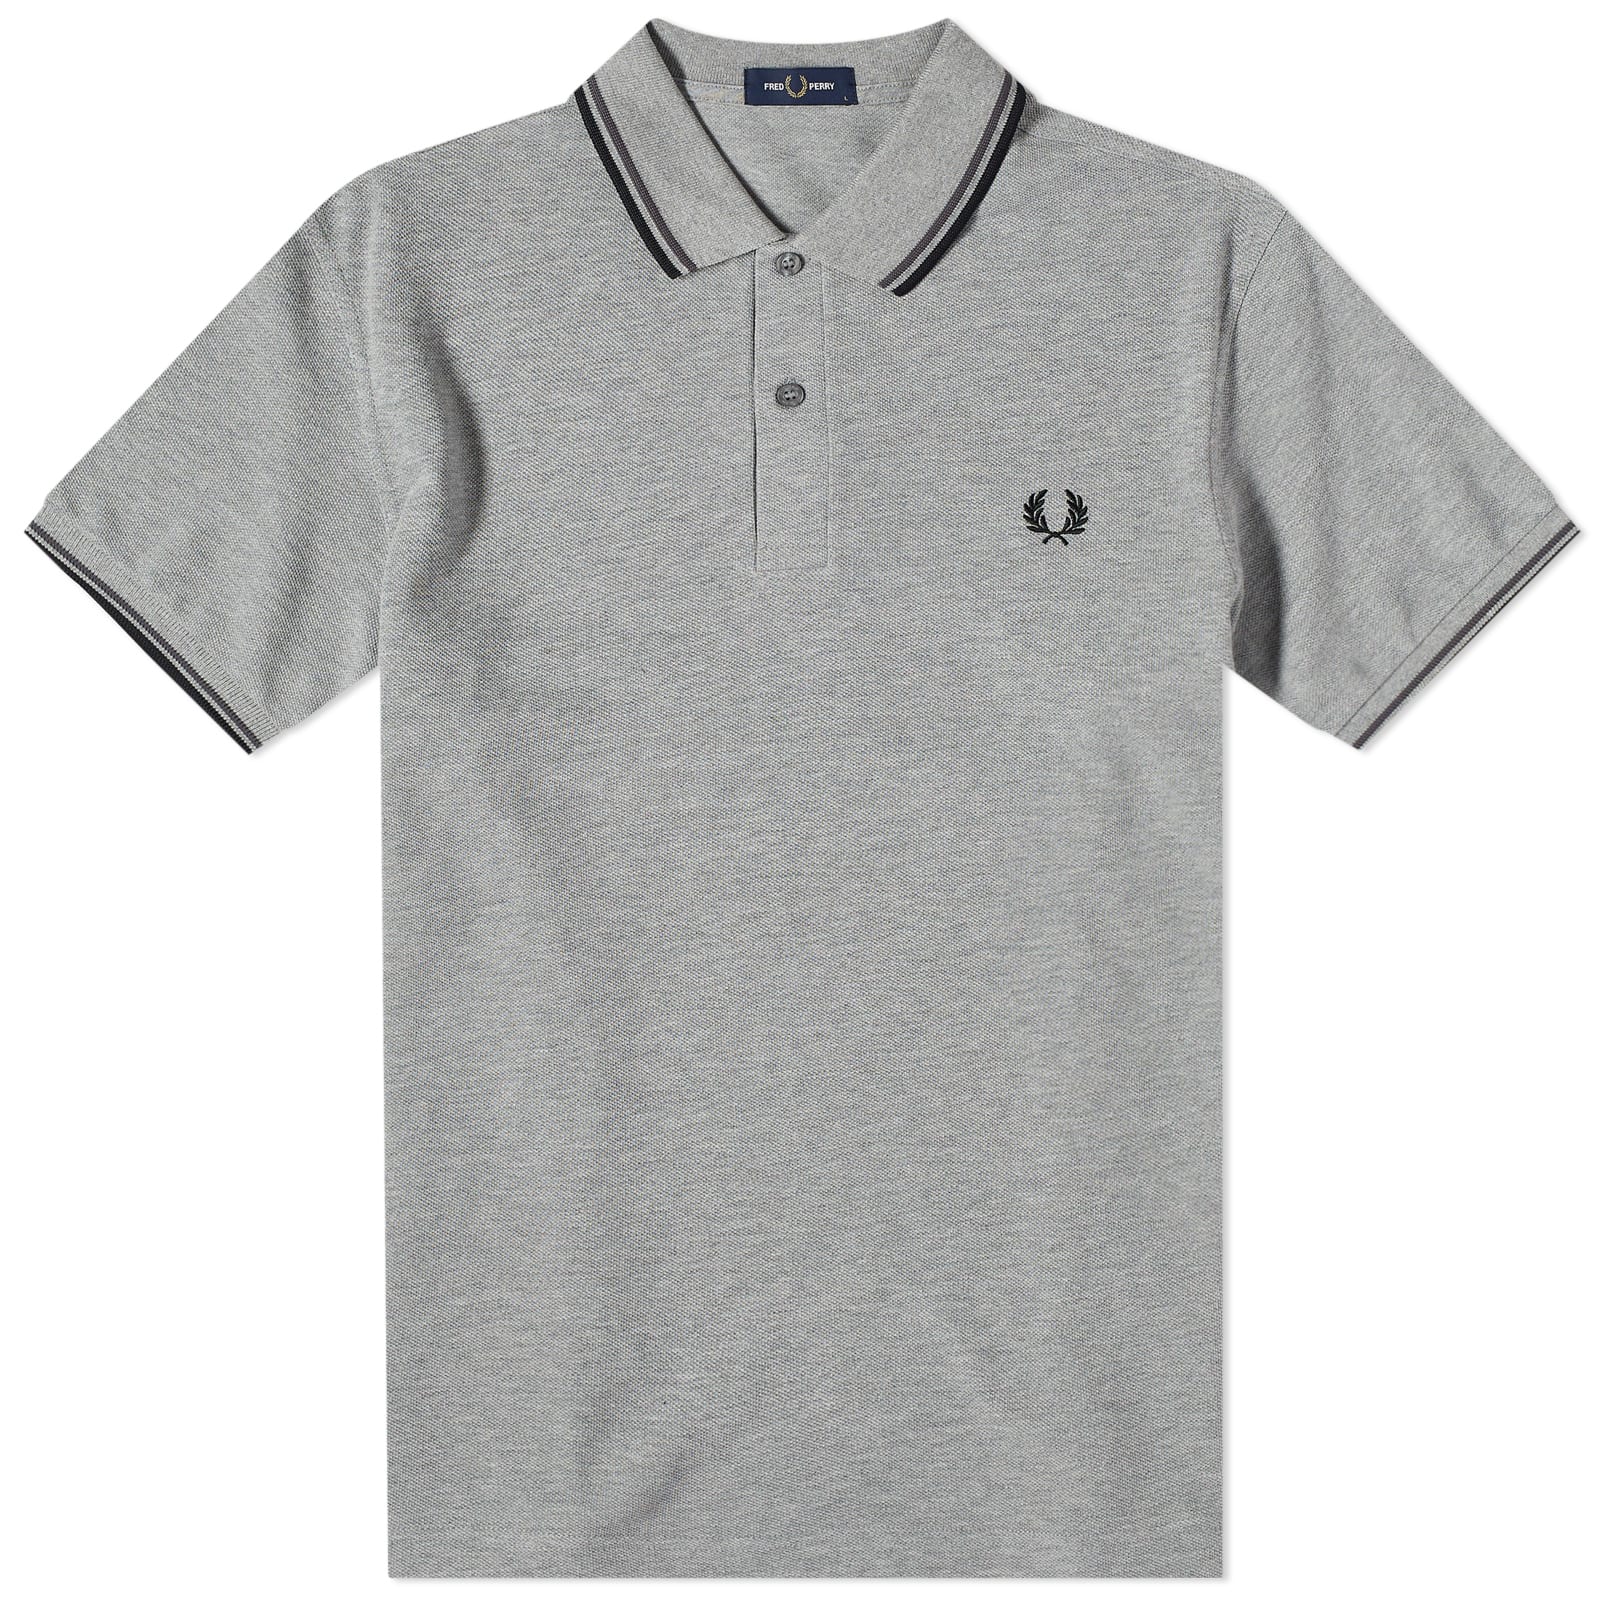 Футболка-поло Fred Perry Twin Tipped, светло-серый однотонная футболка поло fred perry original